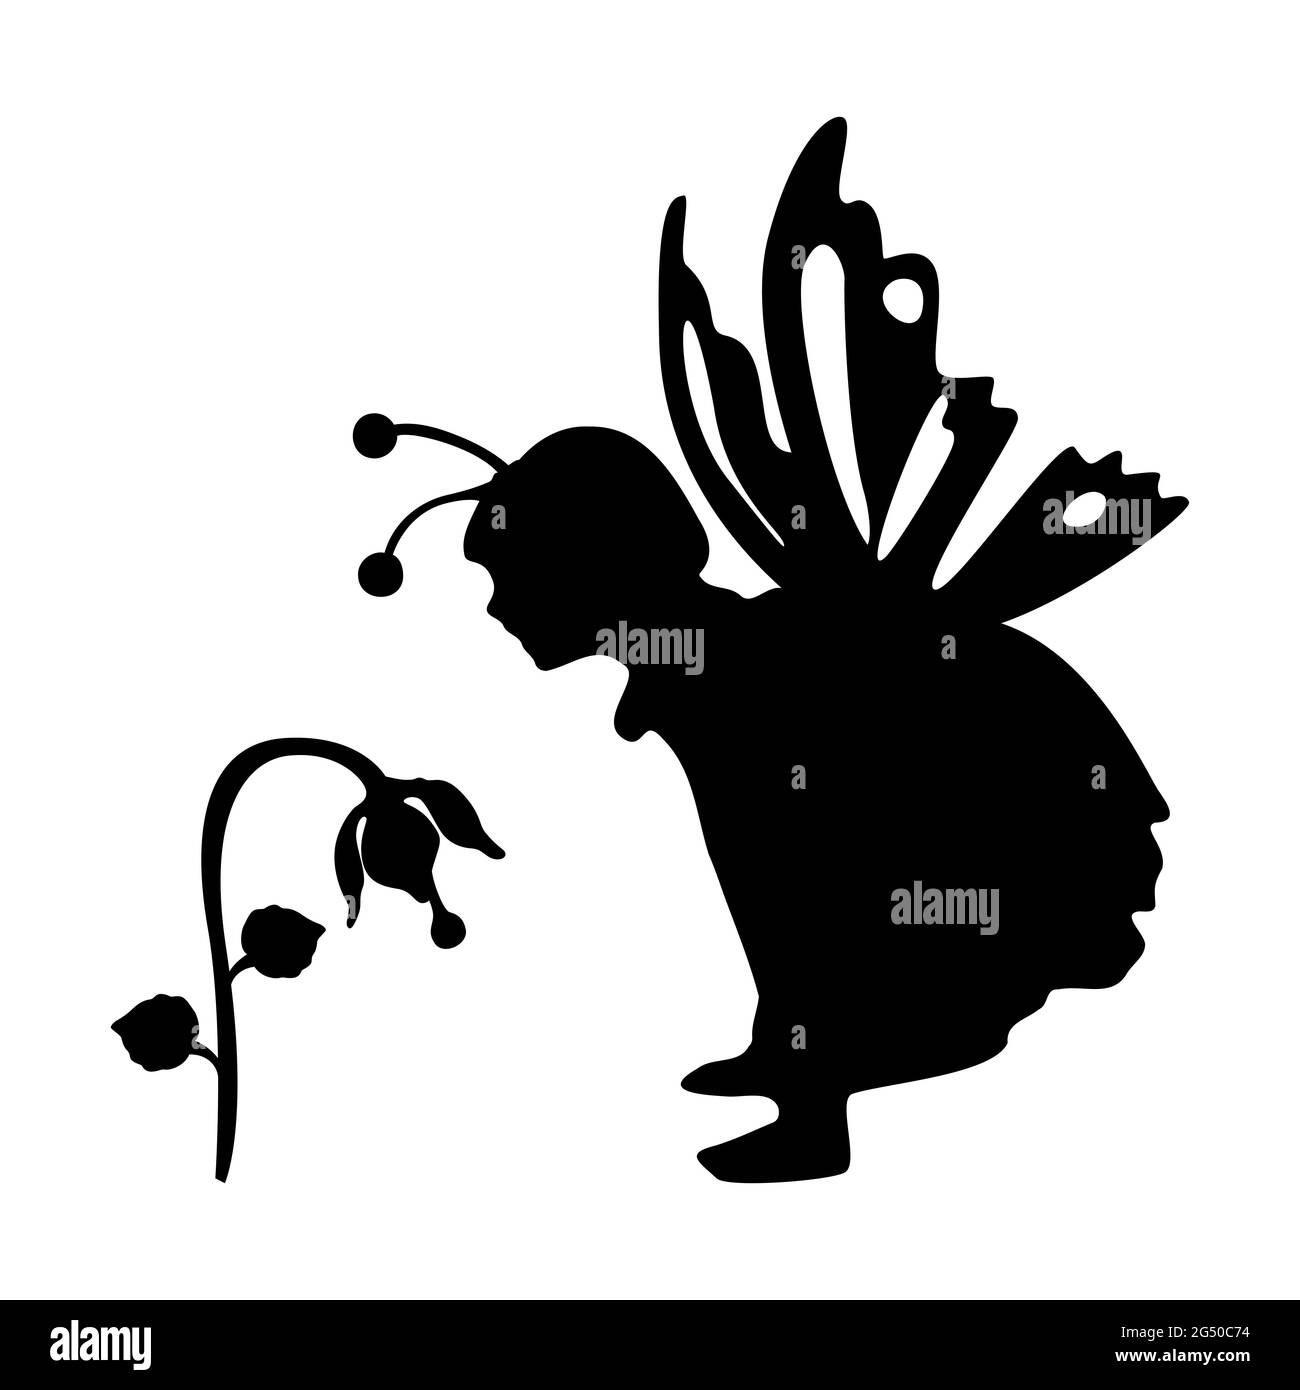 Little girl silhouette with buttefly wings. Vector illustration. Stock Vector